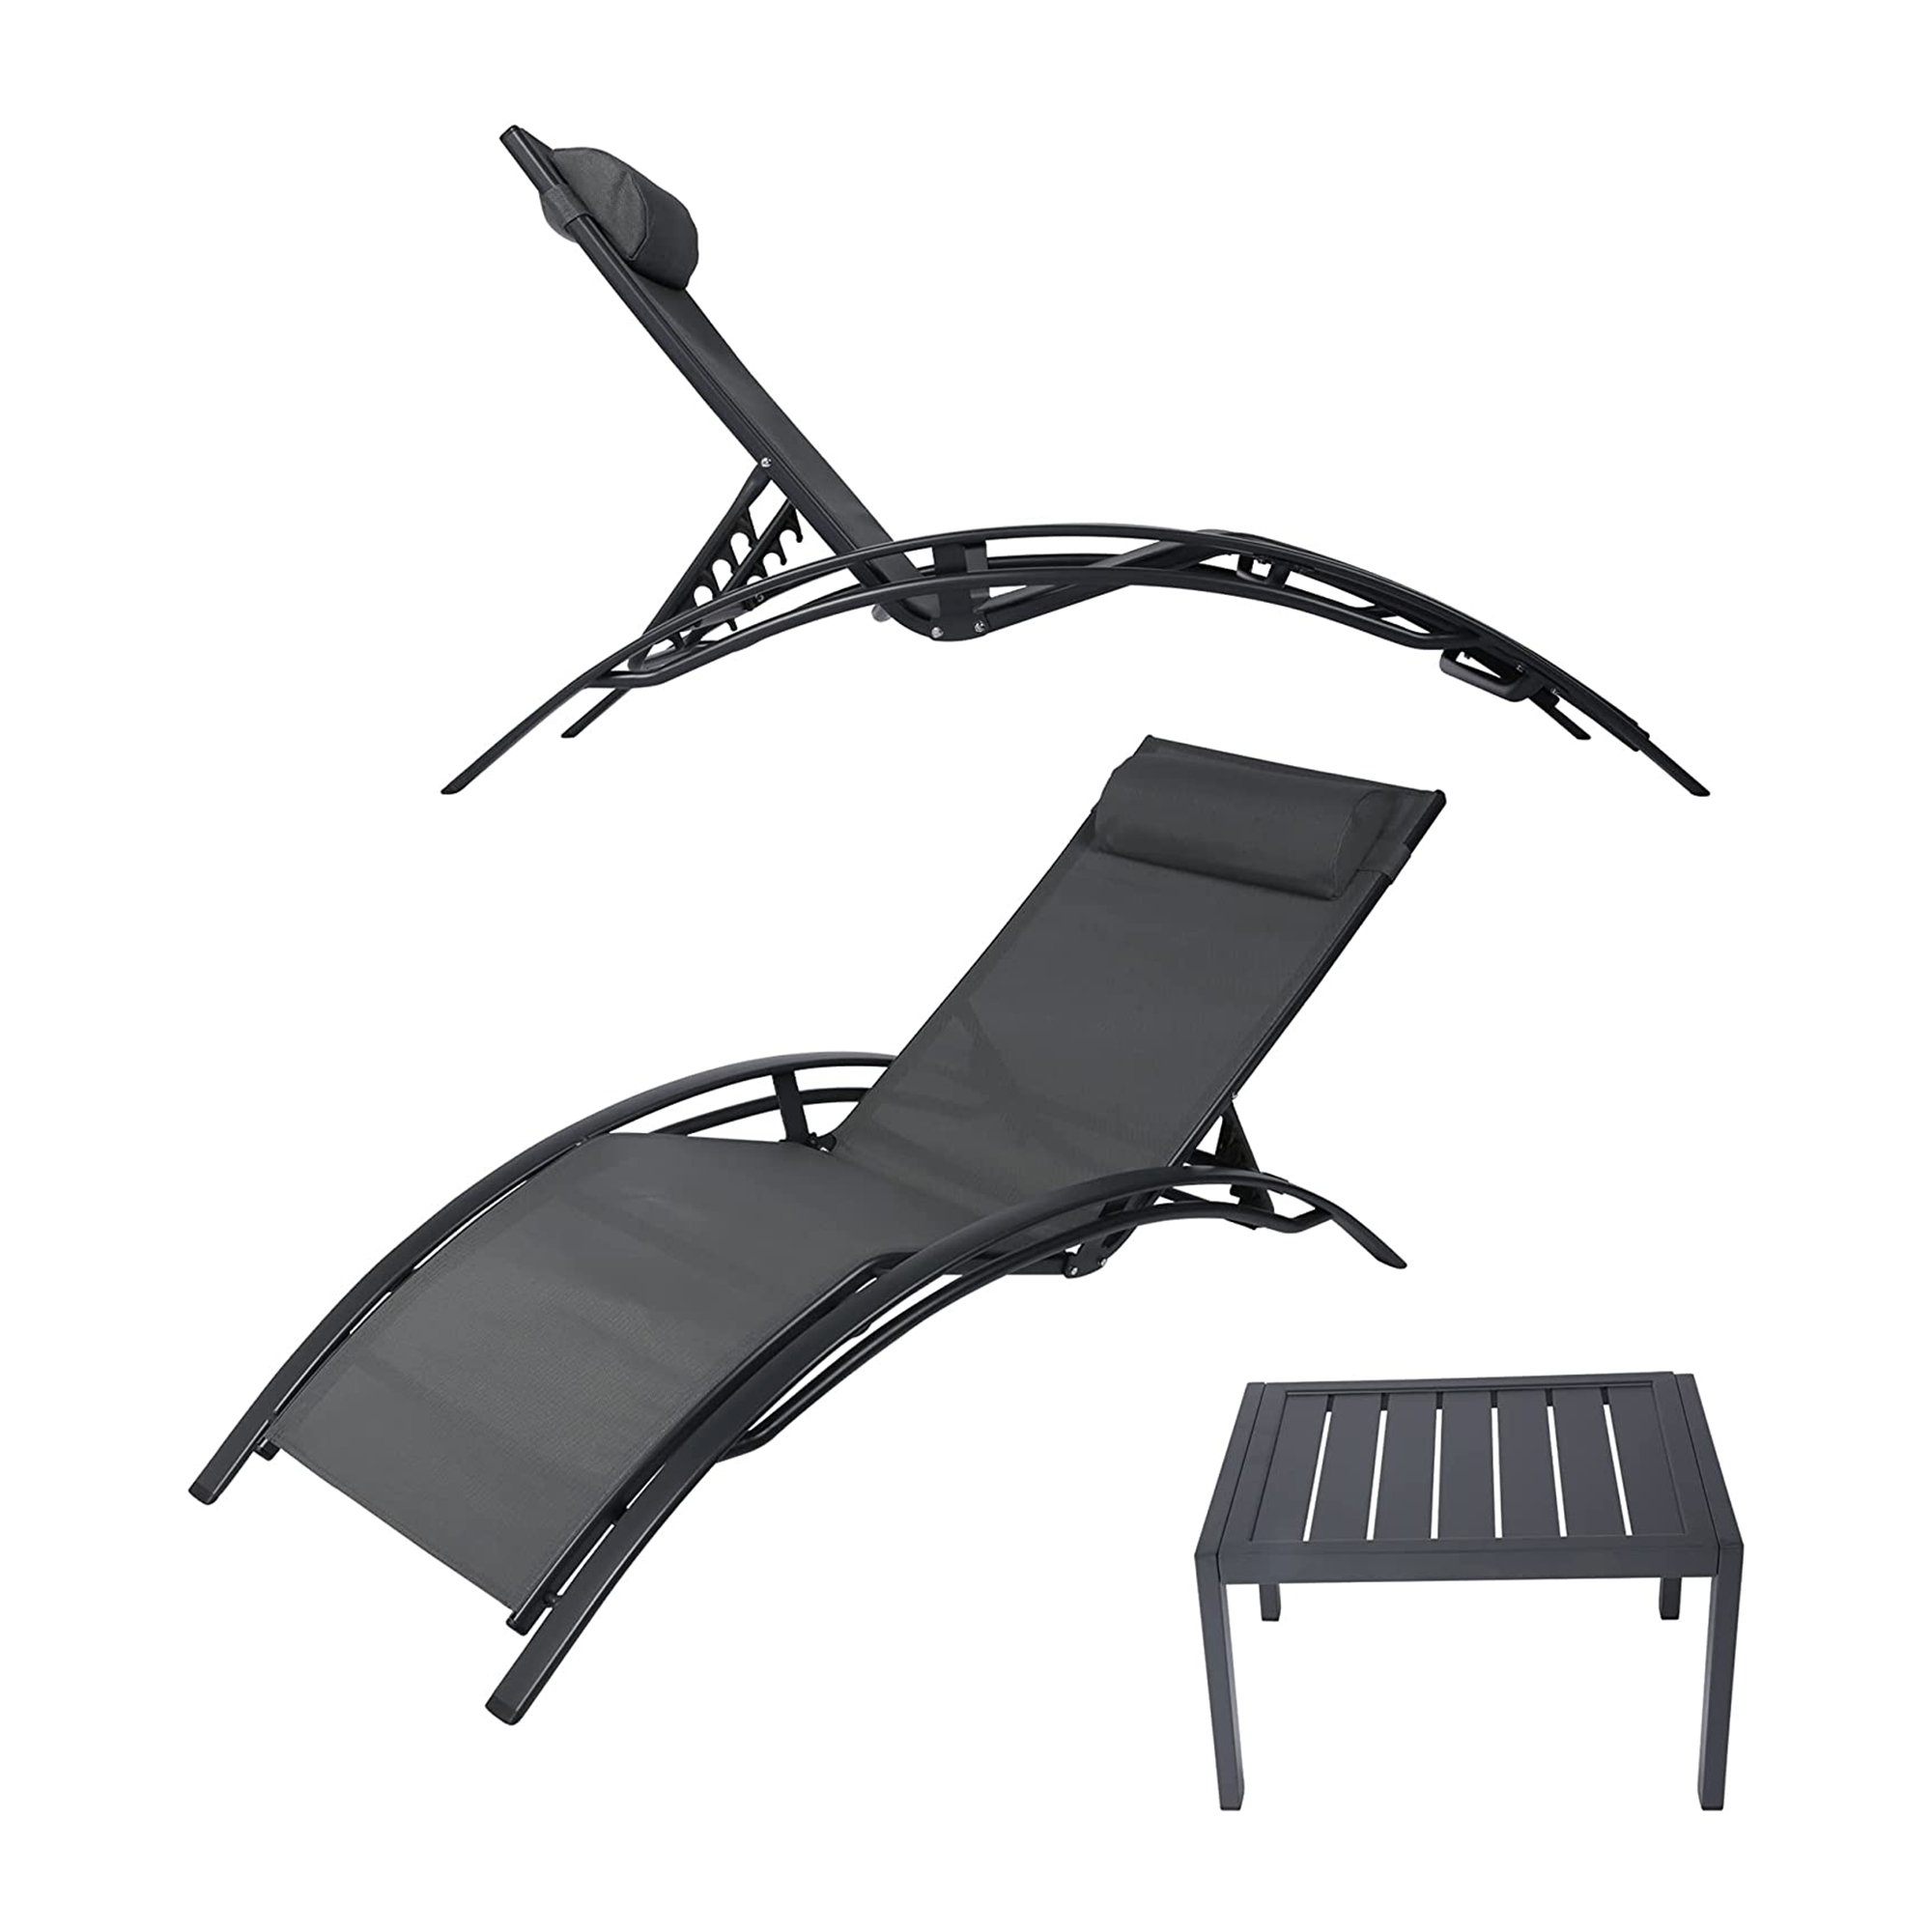 KARMAS PRODUCT Chaise Lounge Aluminum Chair Set of 2 w/Tea Table, Patio Lounge Chair Reclining 4 Adjustable Back Position w/Removable Cushions for Outdoor Beach Pool Backyard Garden Lawn,Gray - image 1 of 7